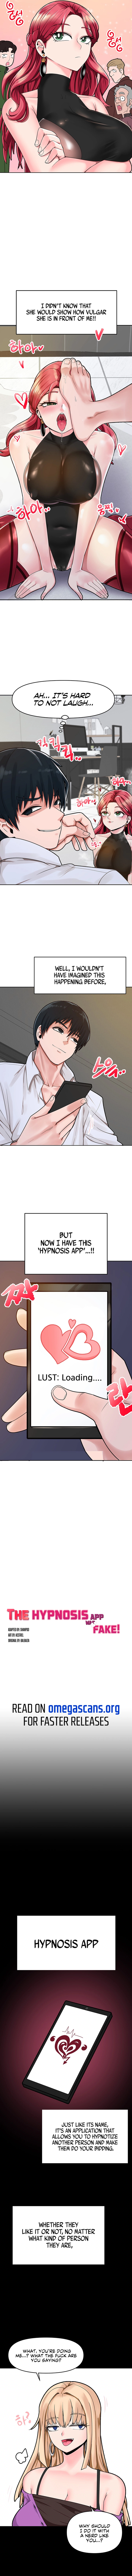 The Hypnosis App was Fake image